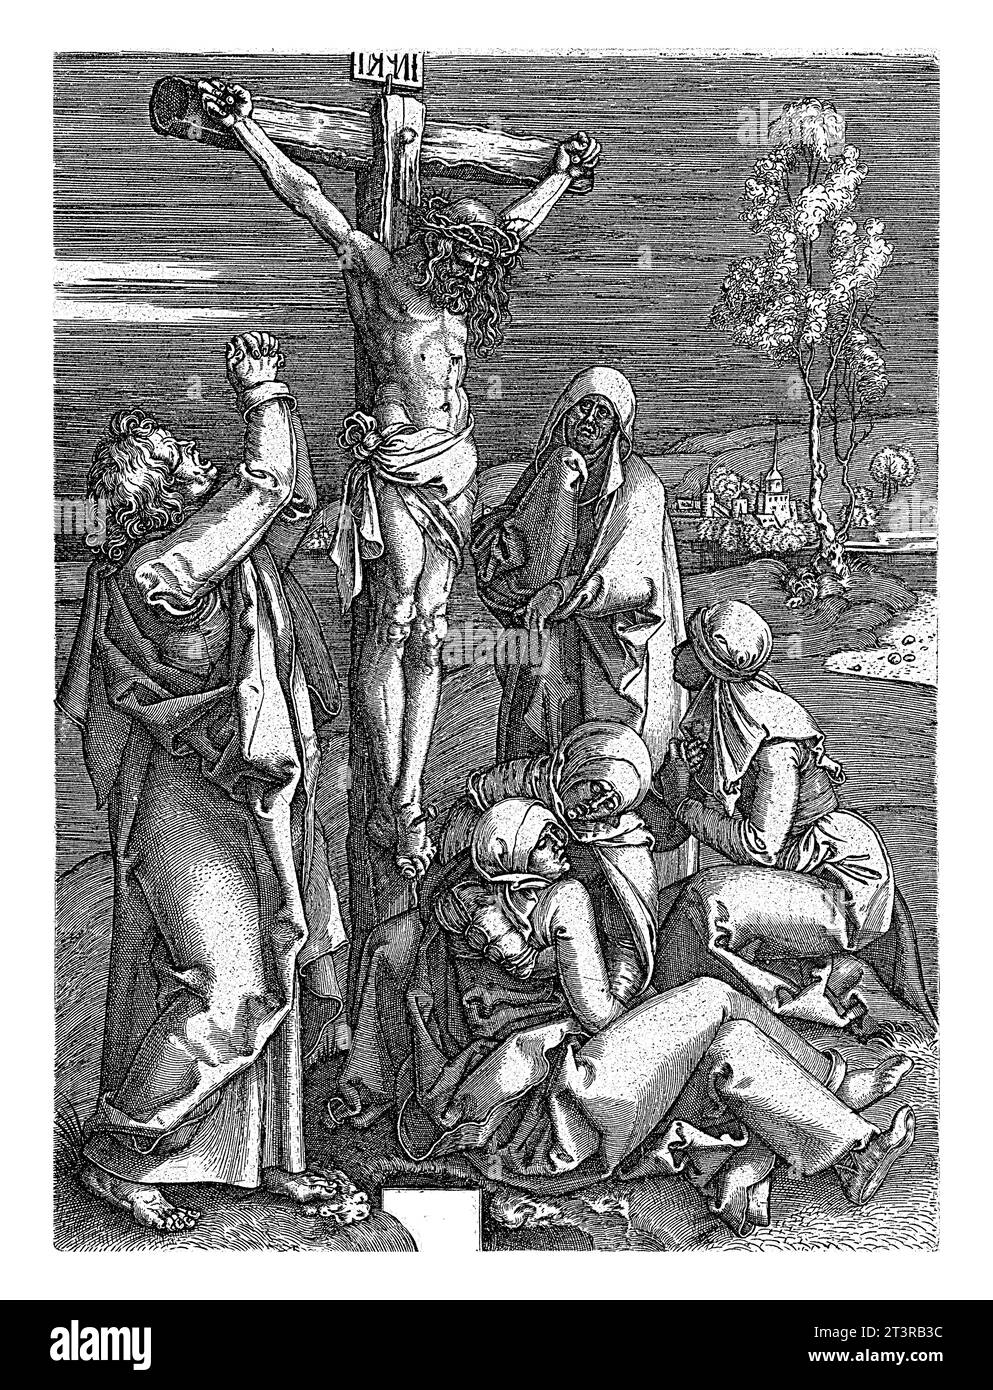 Crucifixion of Christ, Johannes Wierix, after Albrecht Durer, 1564 Christ hanging on the cross. Johannes raises his arms to heaven in despair. Stock Photo